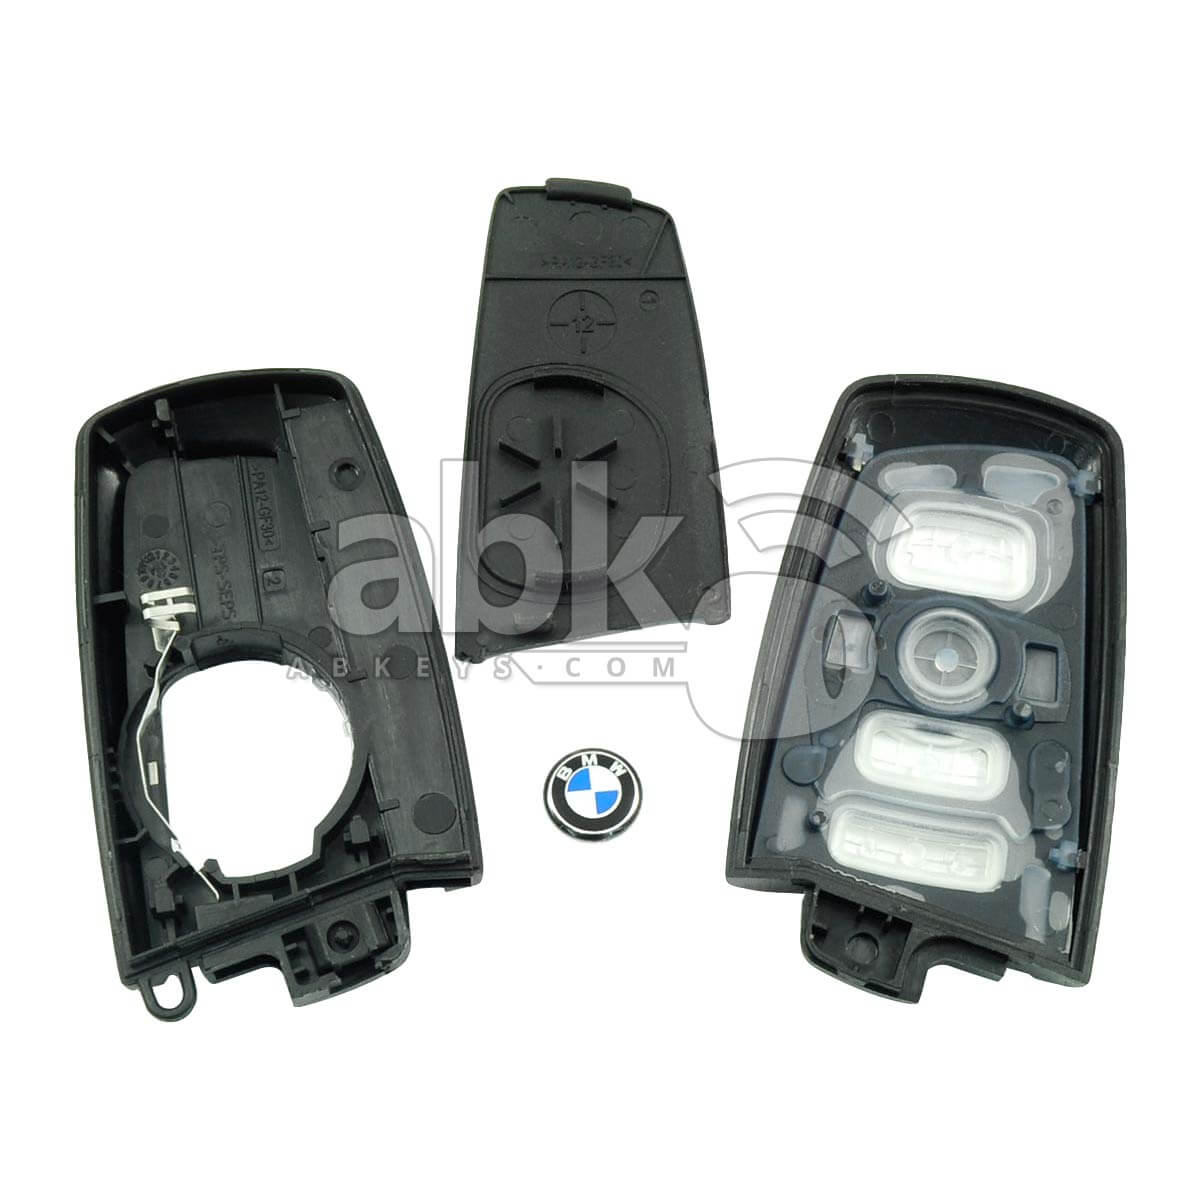 Bmw F Series 2009+ Smart Key Cover 4Buttons Red - ABK-2678 - ABKEYS.COM